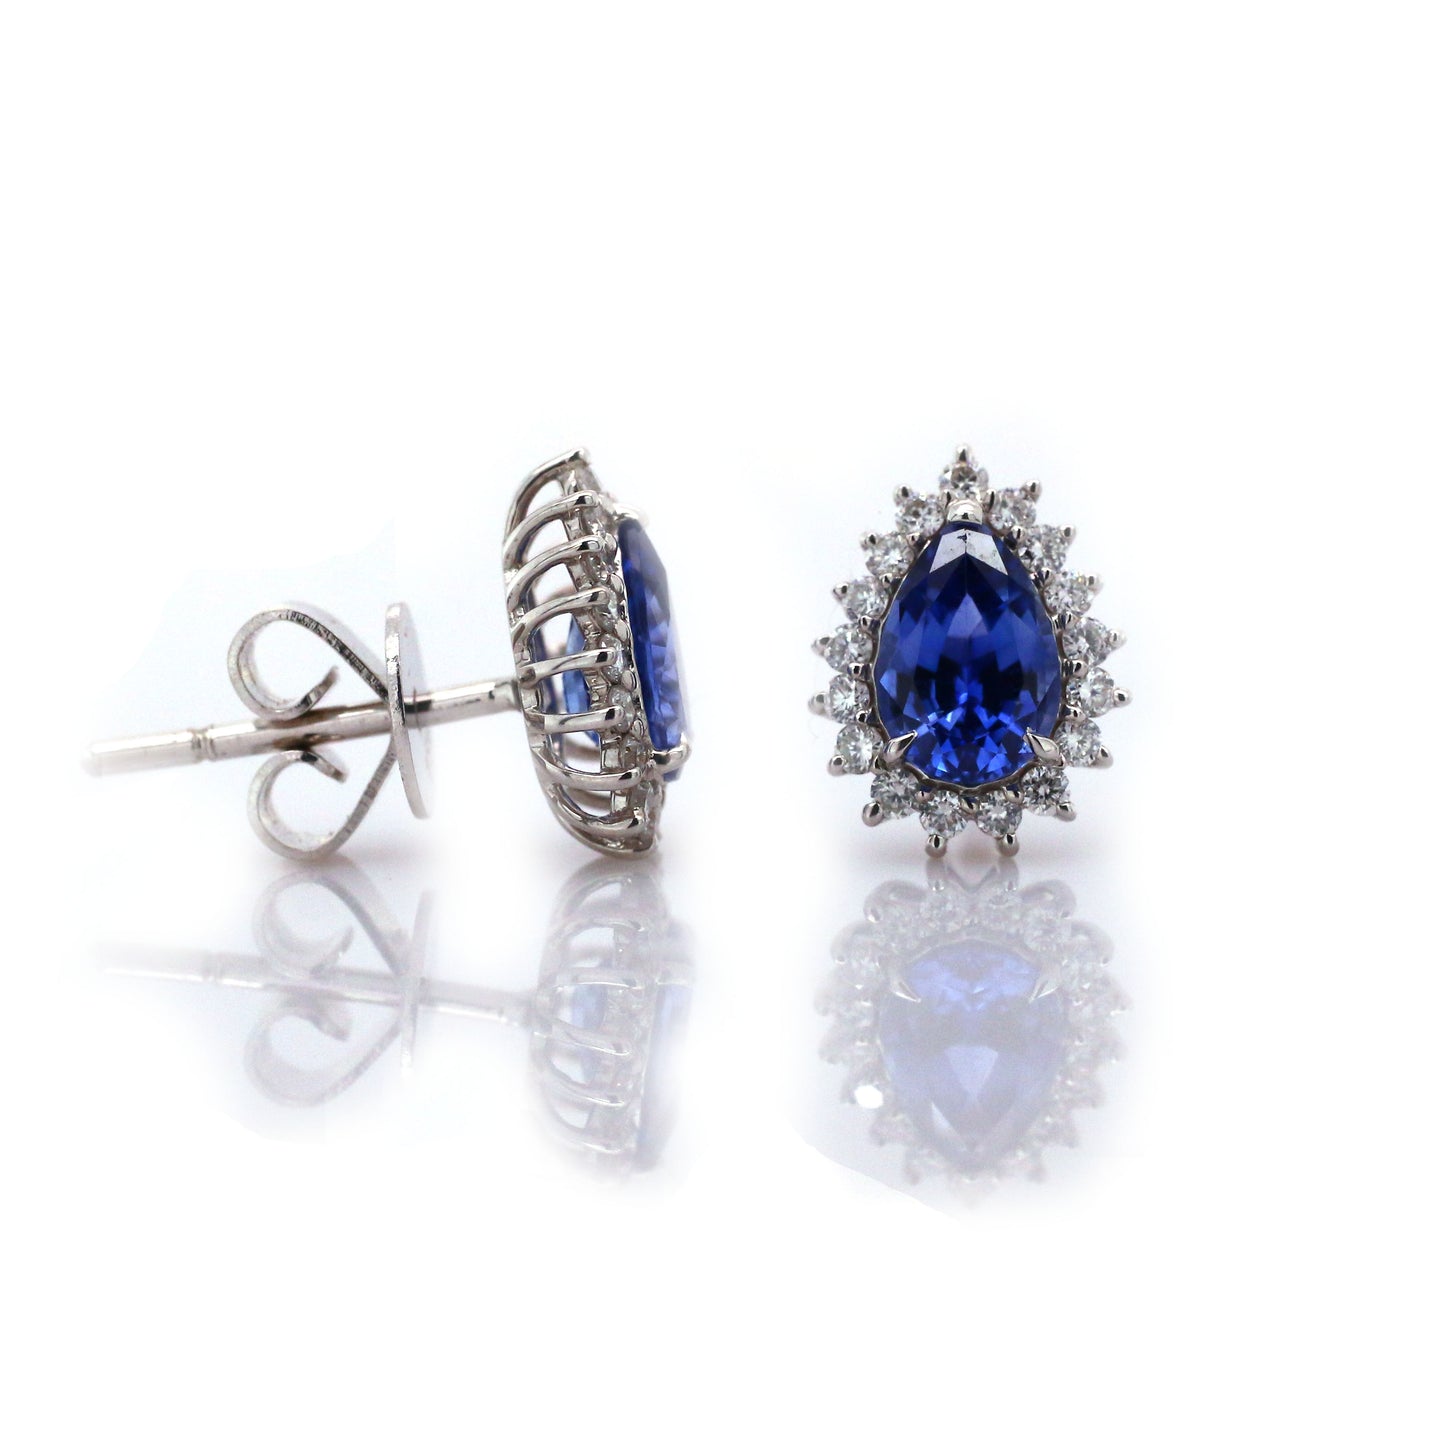 Splendid Pair of 18k White Gold Earring with Royal Blue Sapphire and Diamonds